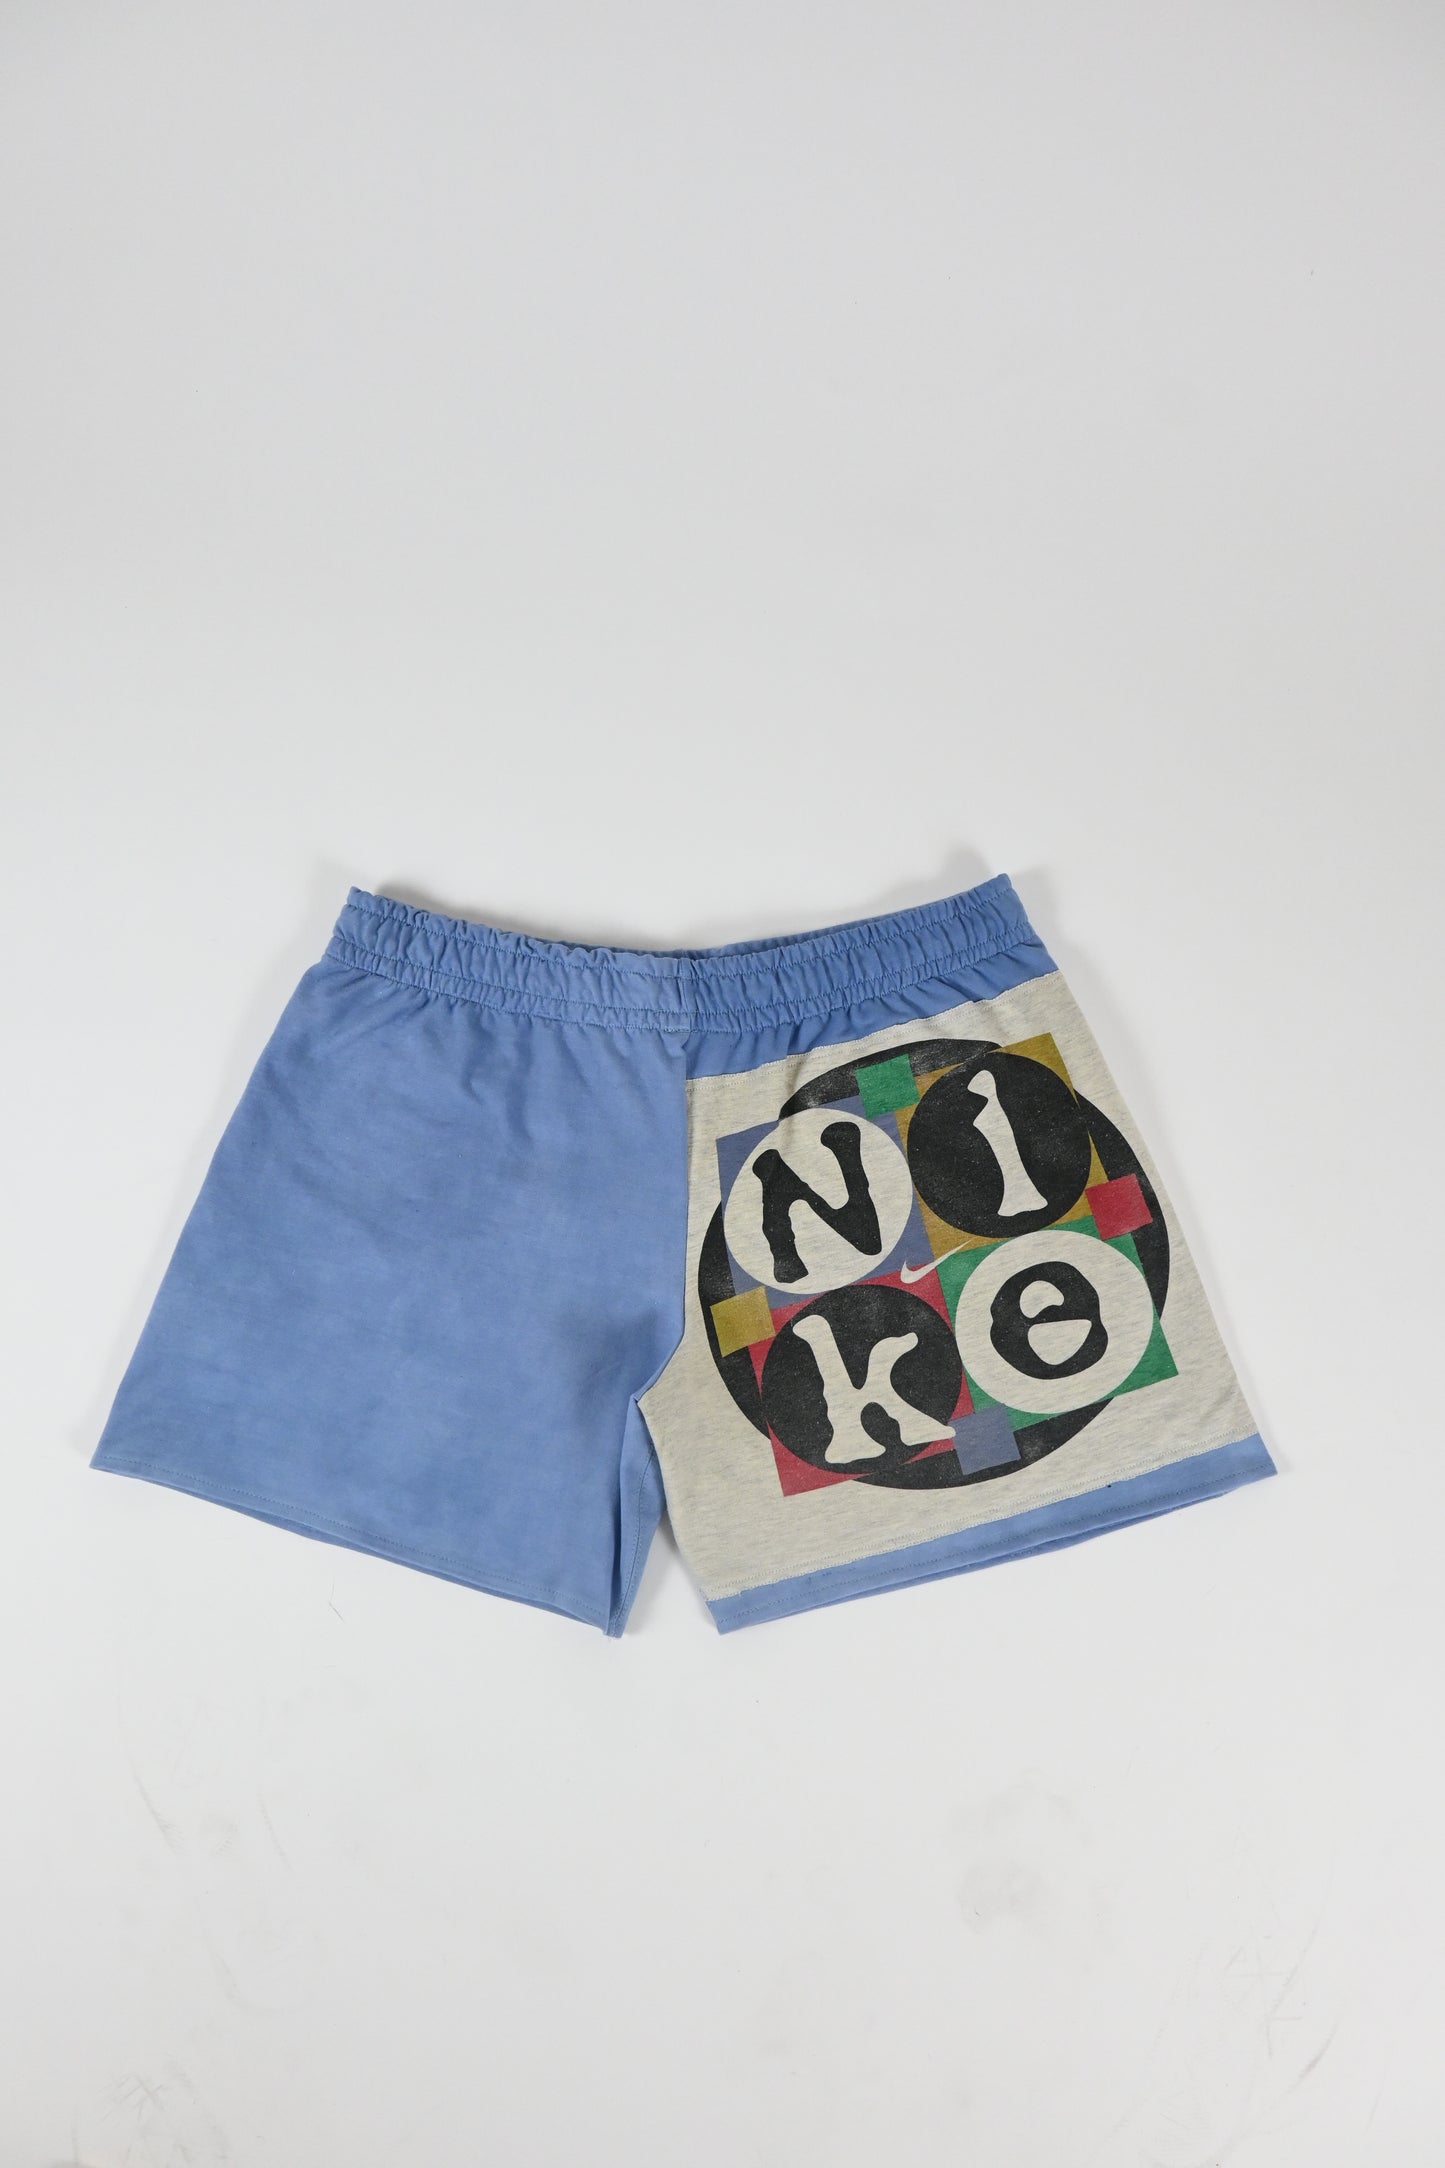 Reworked Shorts "the 90s"